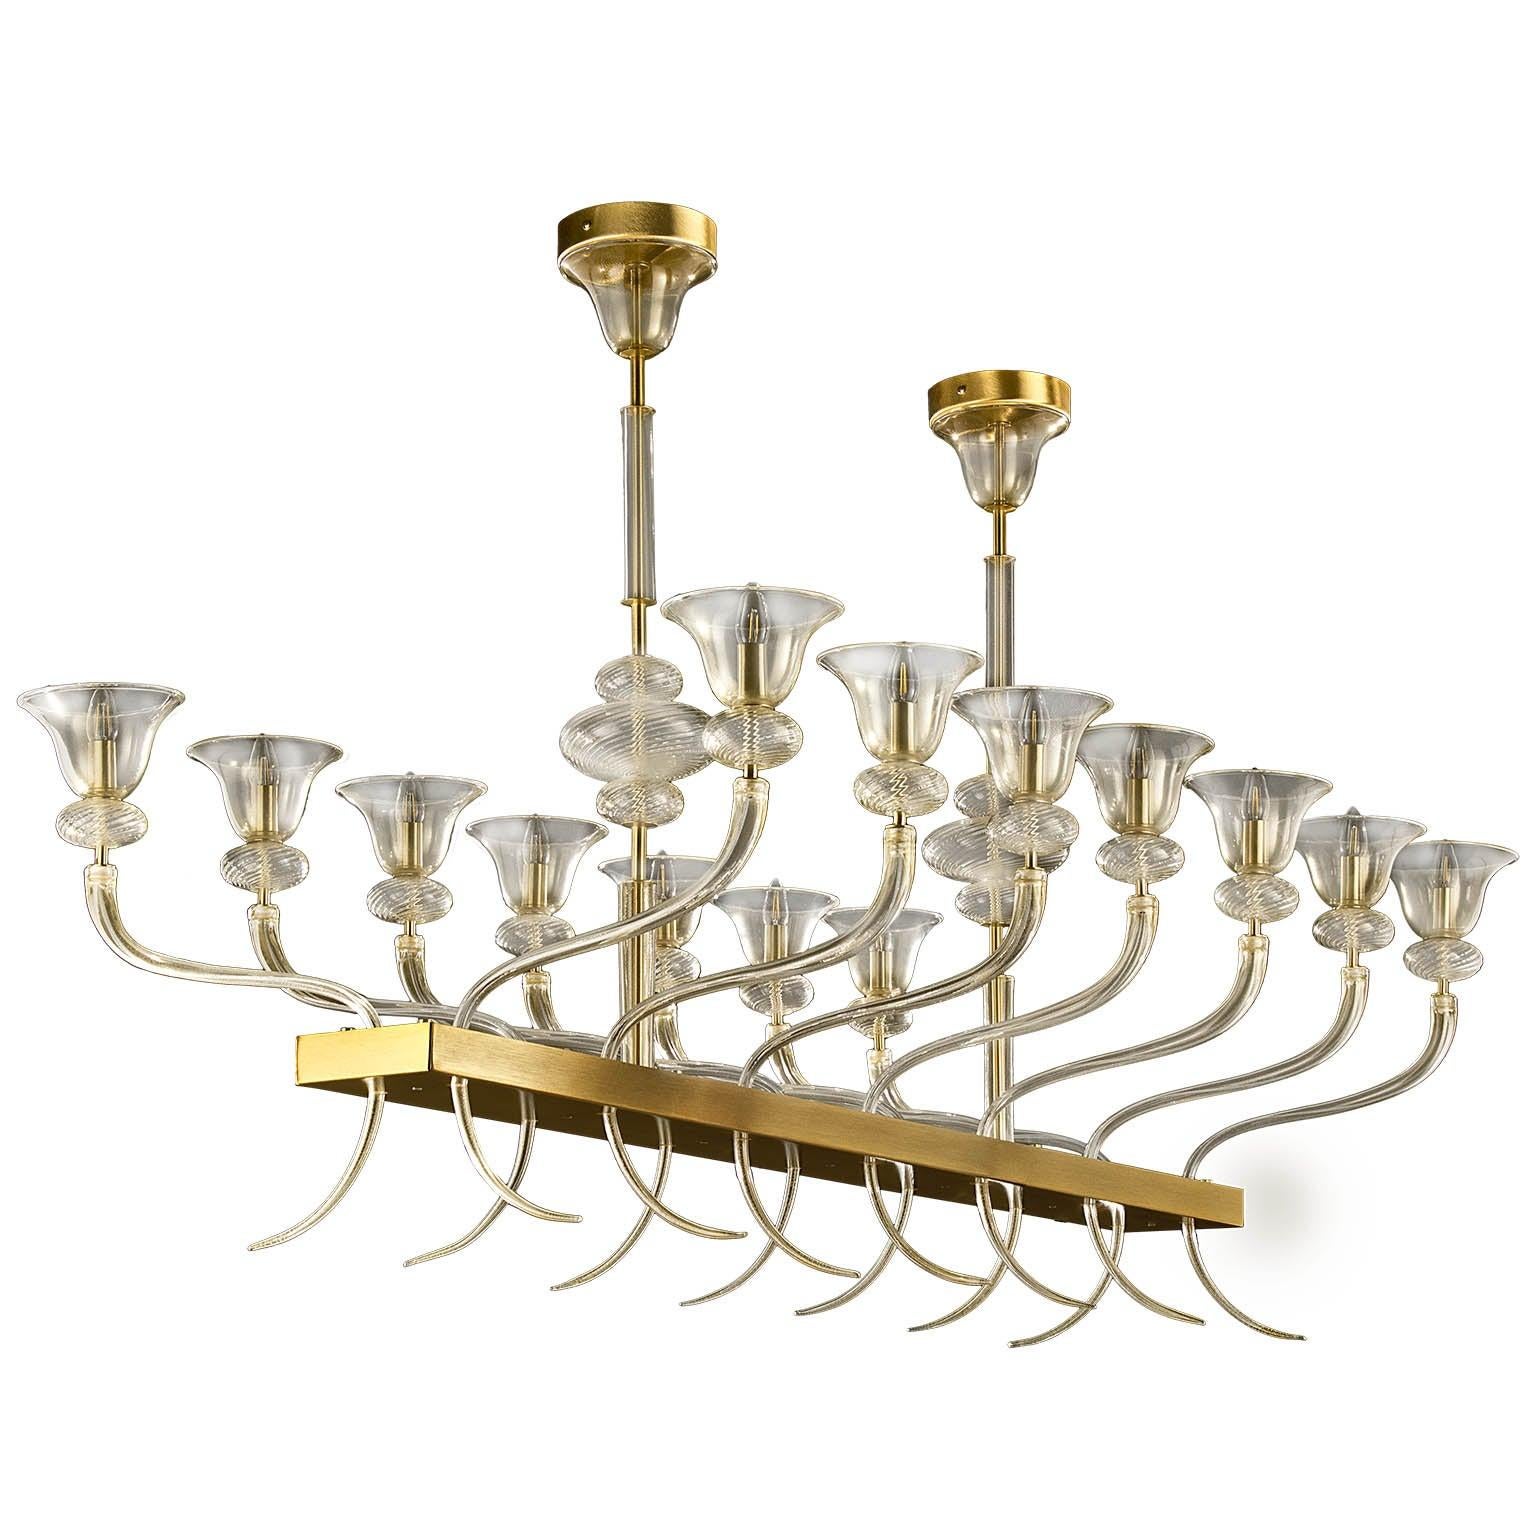 21st Century Chandelier 14 Arms Gold Murano Glass, Brushed Fixture by Multiforme For Sale